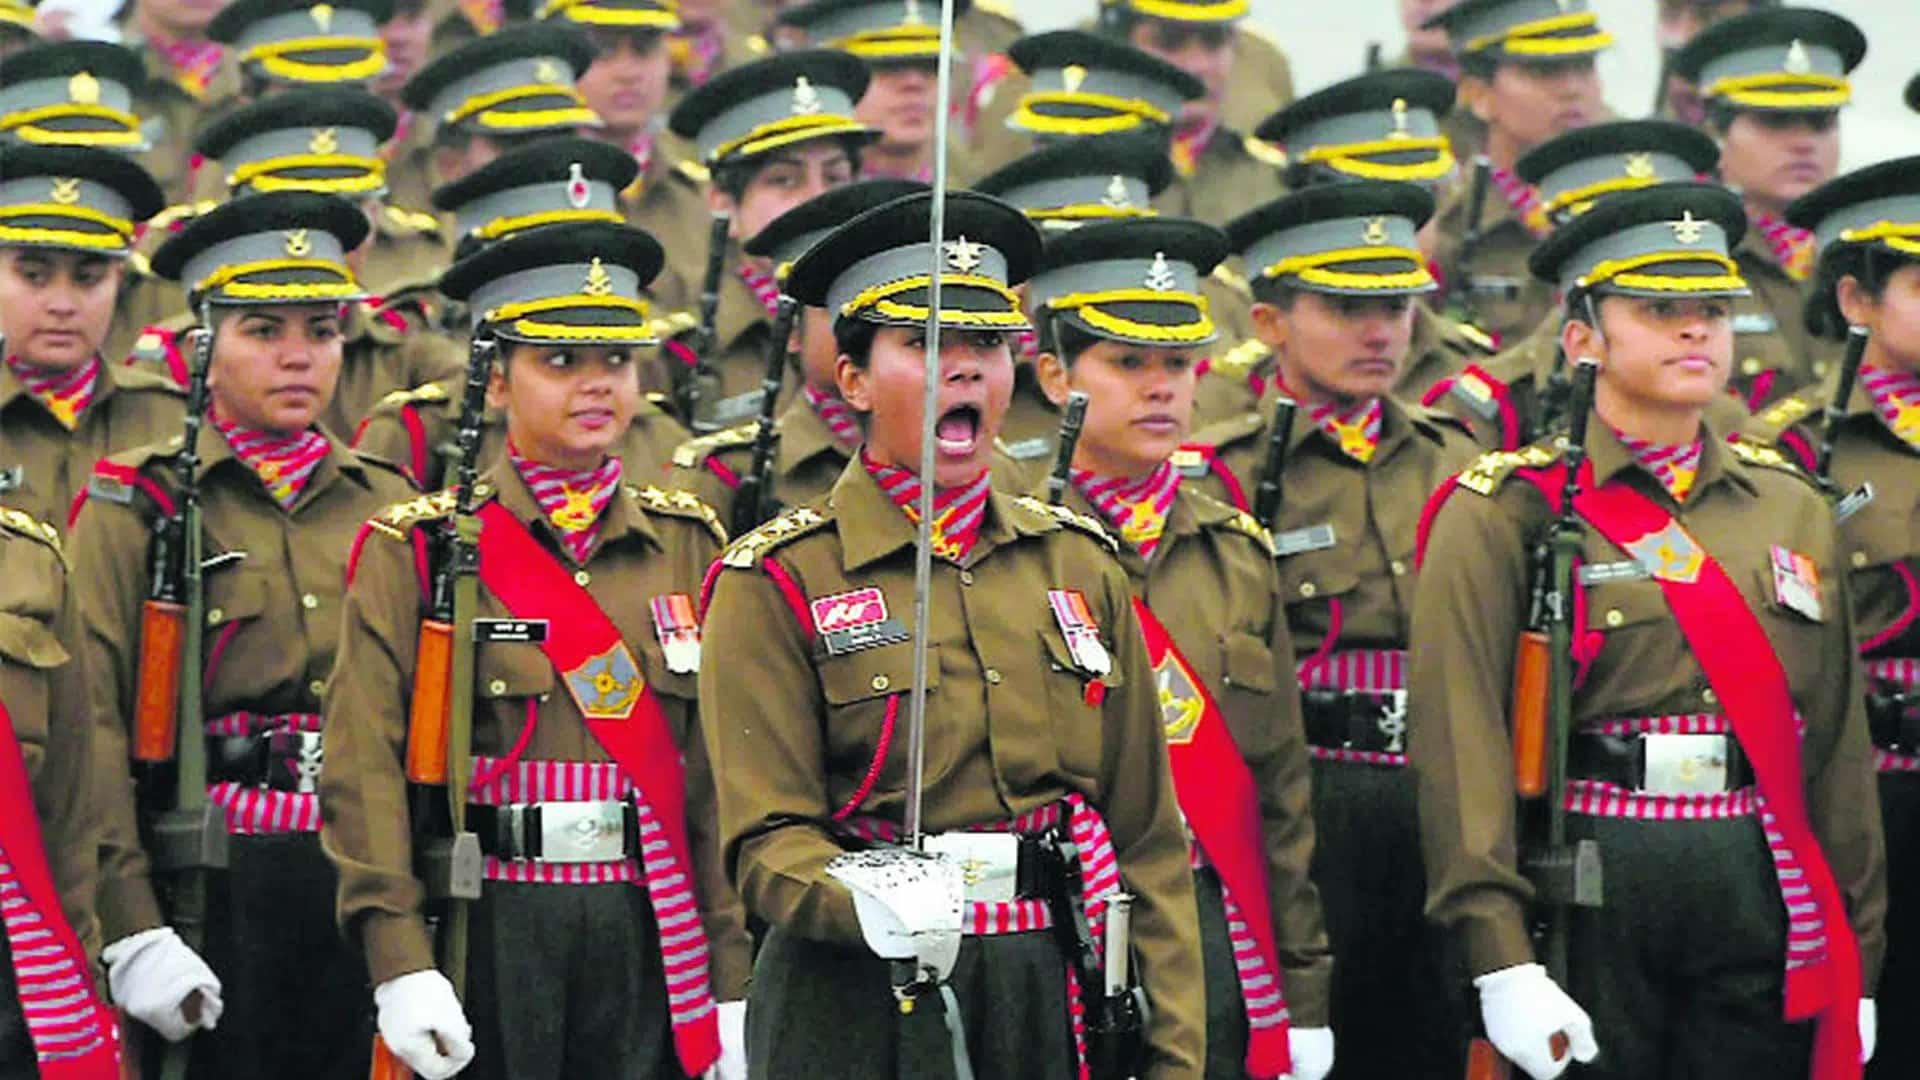 Women will be allowed to join National Defence Academy: Centre to SC